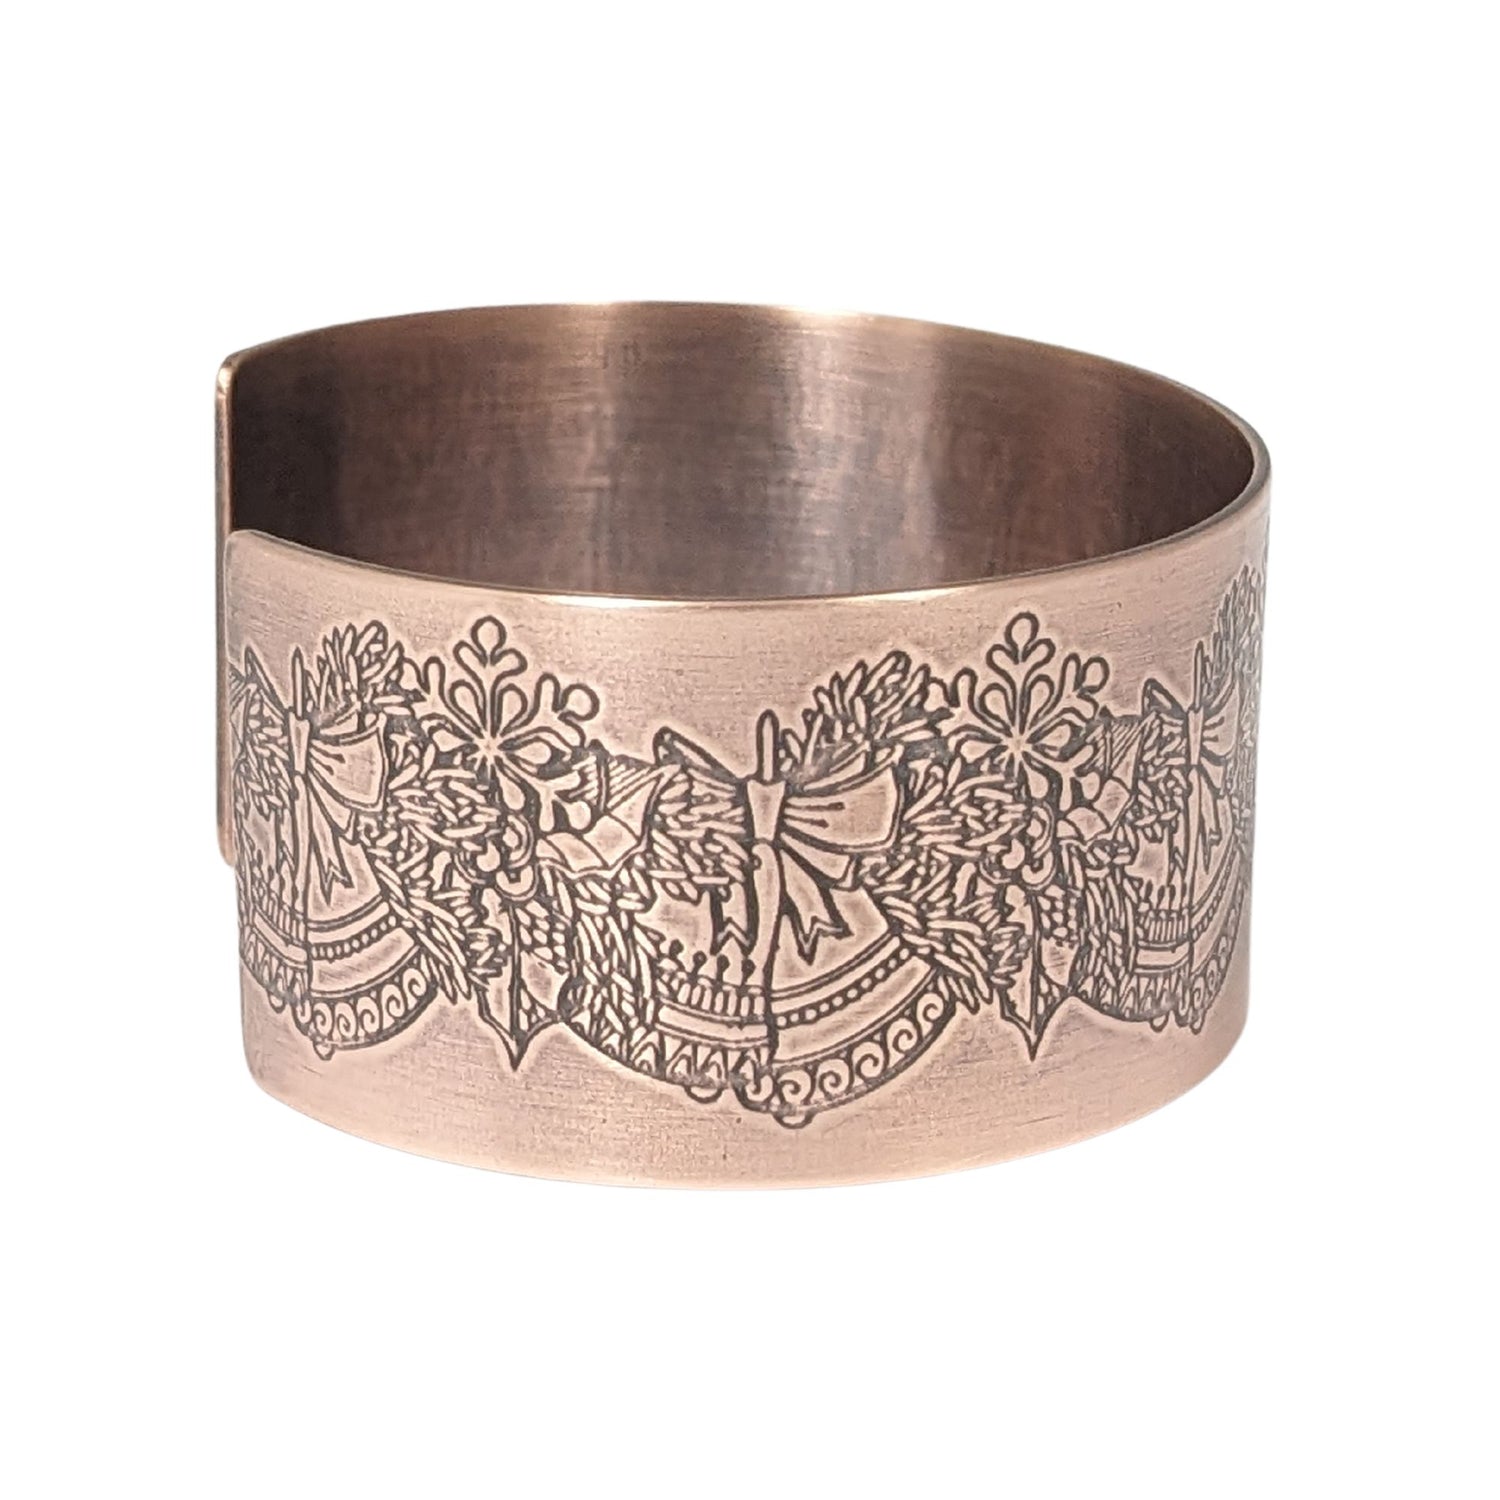 copper cuff bracelet. pattern along entire length is an evergreen bough with pairs of bells.